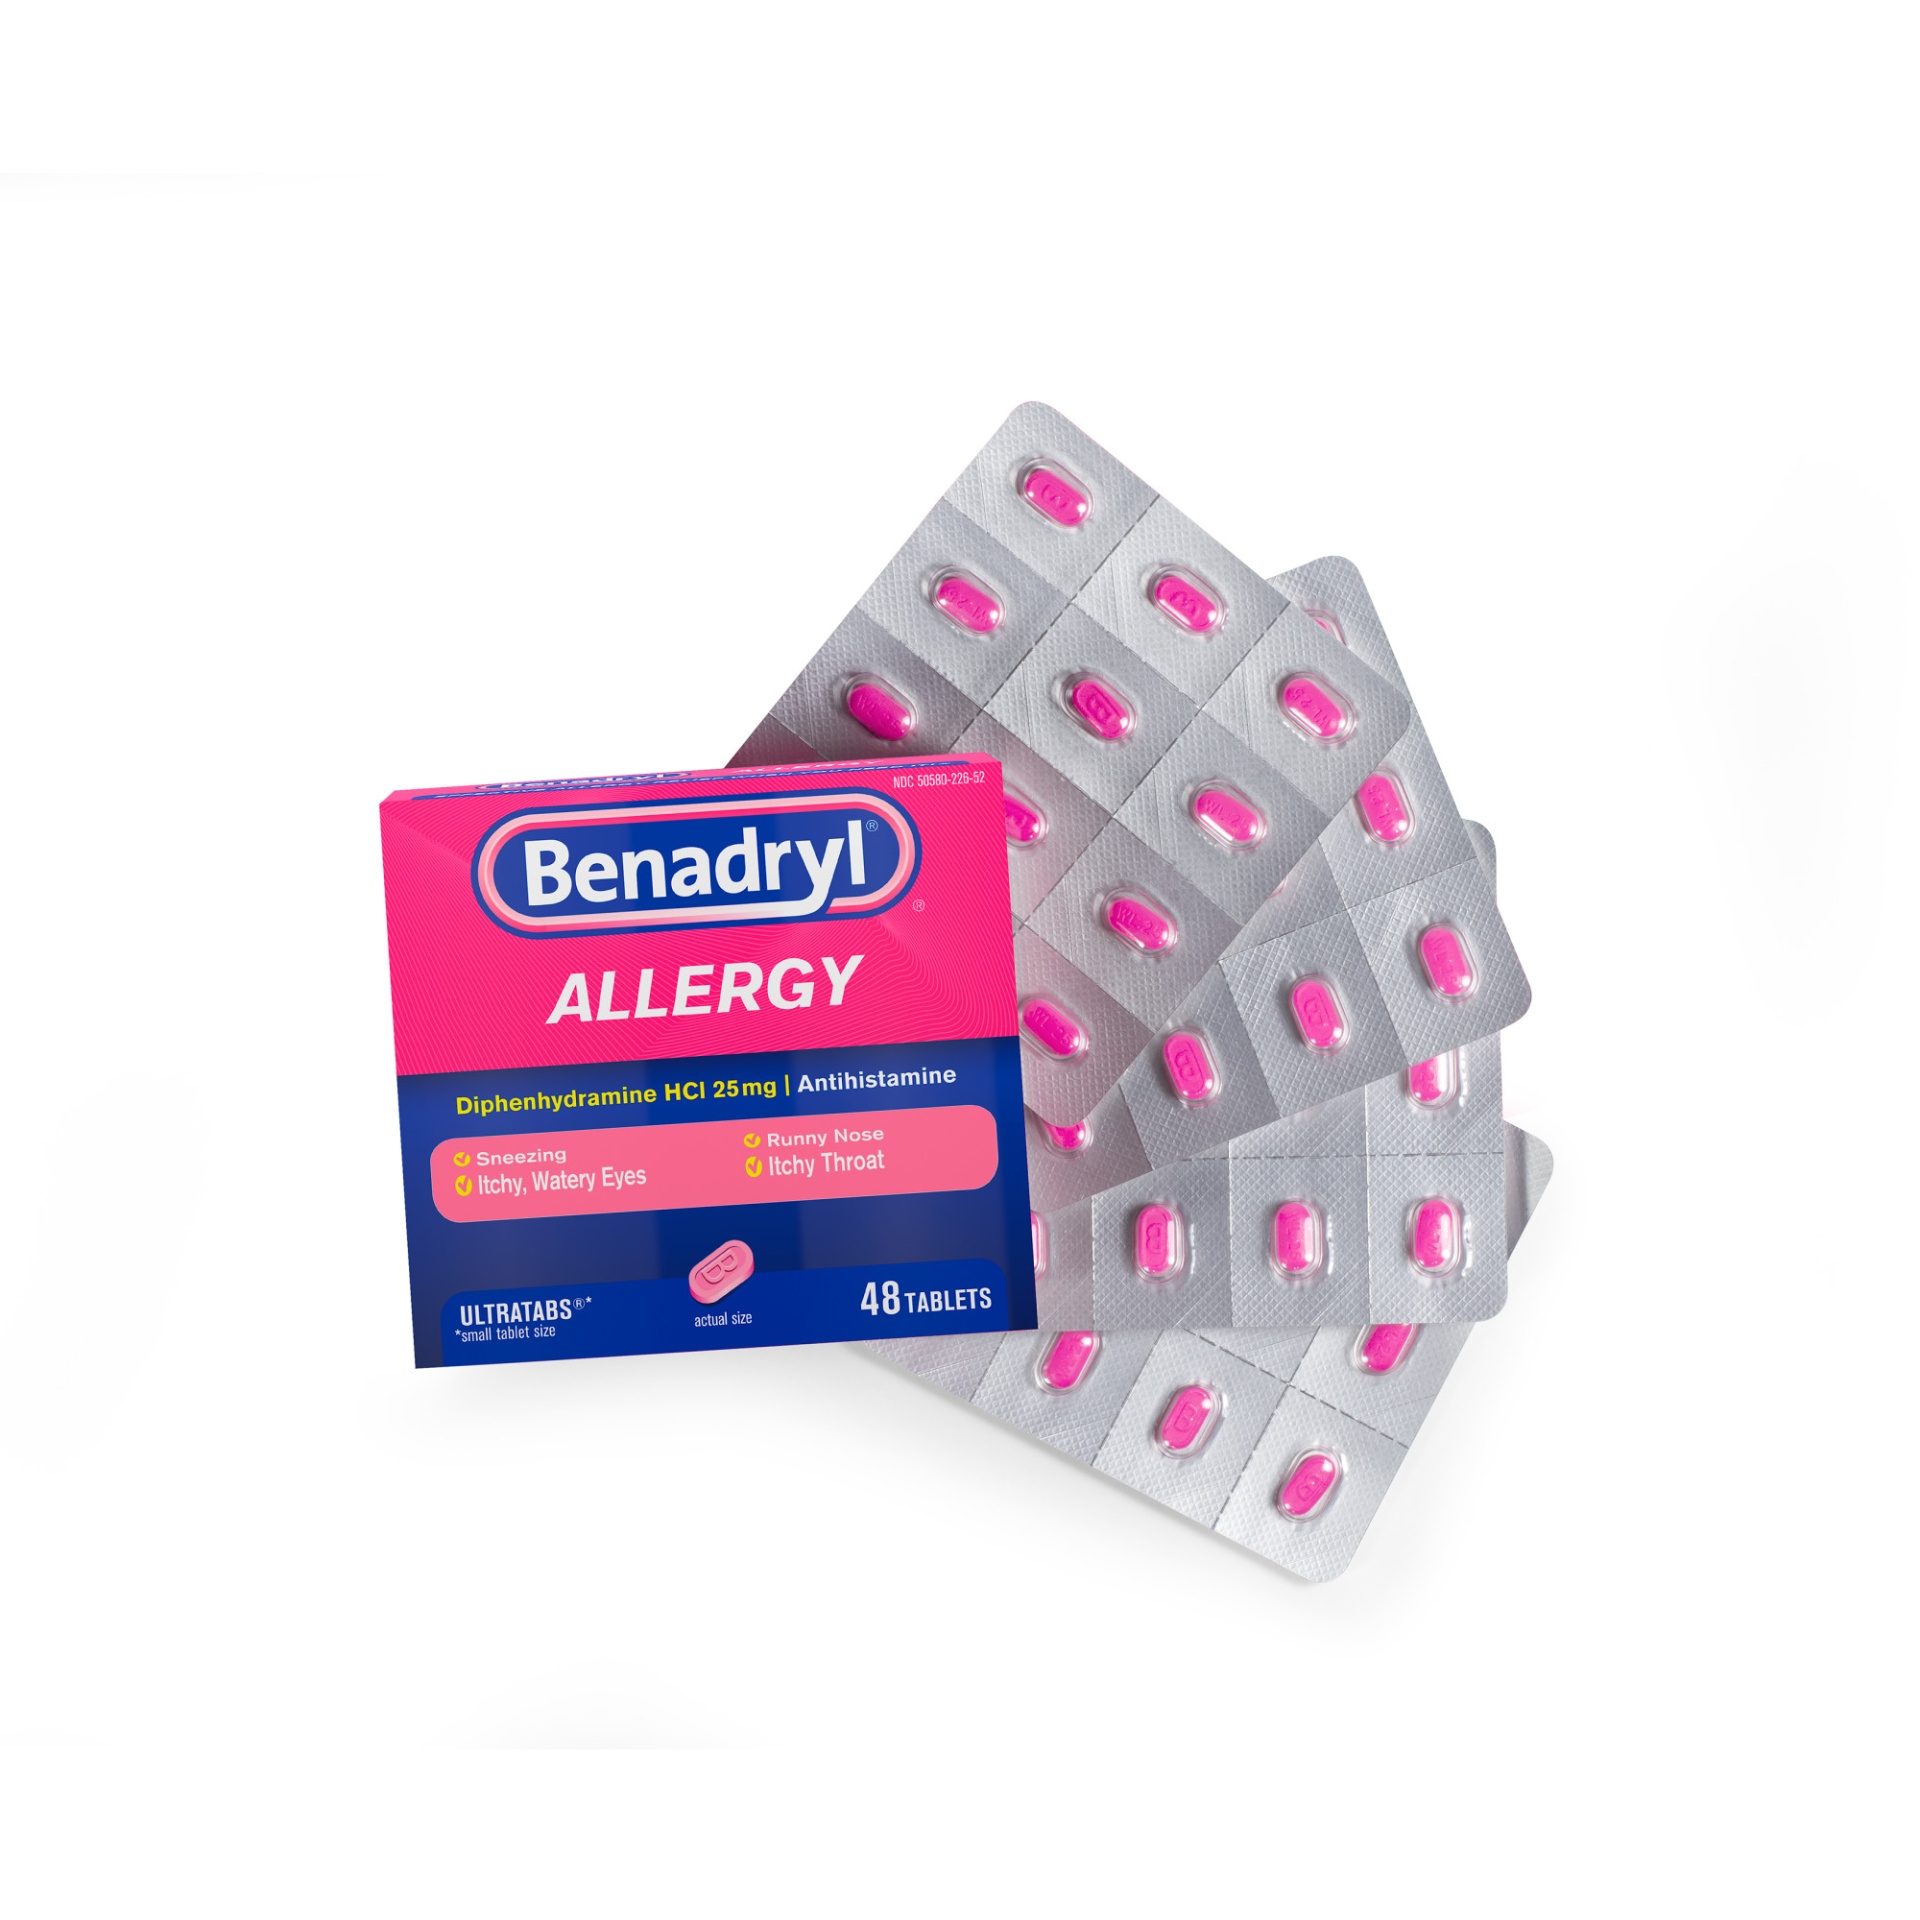 slide 1 of 5, Benadryl Ultratabs Antihistamine Allergy Relief Medicine, 25 mg Diphenhydramine HCl Tablets For Relief of Allergy Symptoms Due to Hay Fever, Upper Respiratory Allergies & More, 48 ct; 25 mg